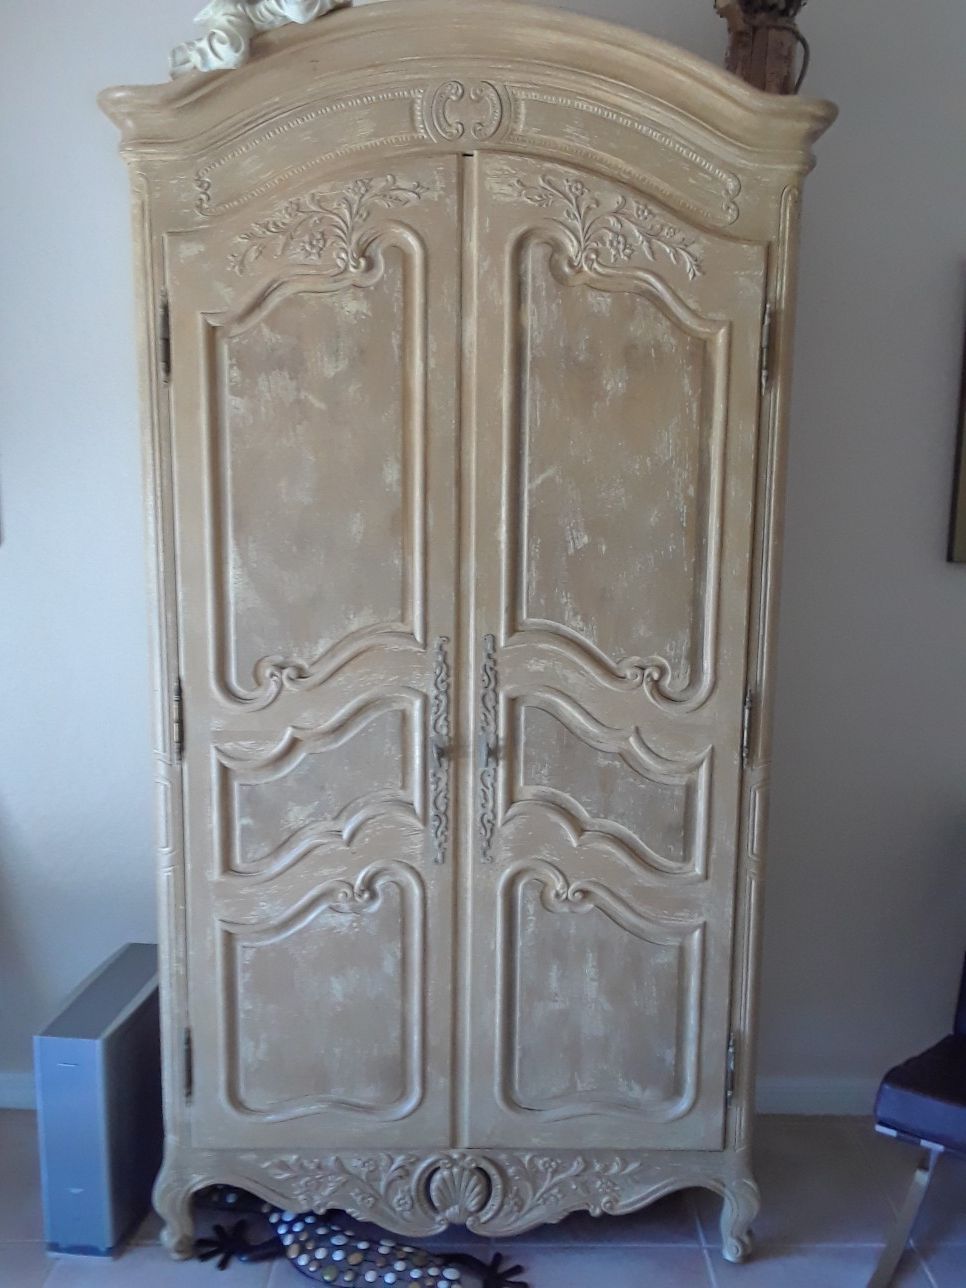 Henredon secretary paid 6500 looking for 3000 firm or best offer beautiful piece of furniture